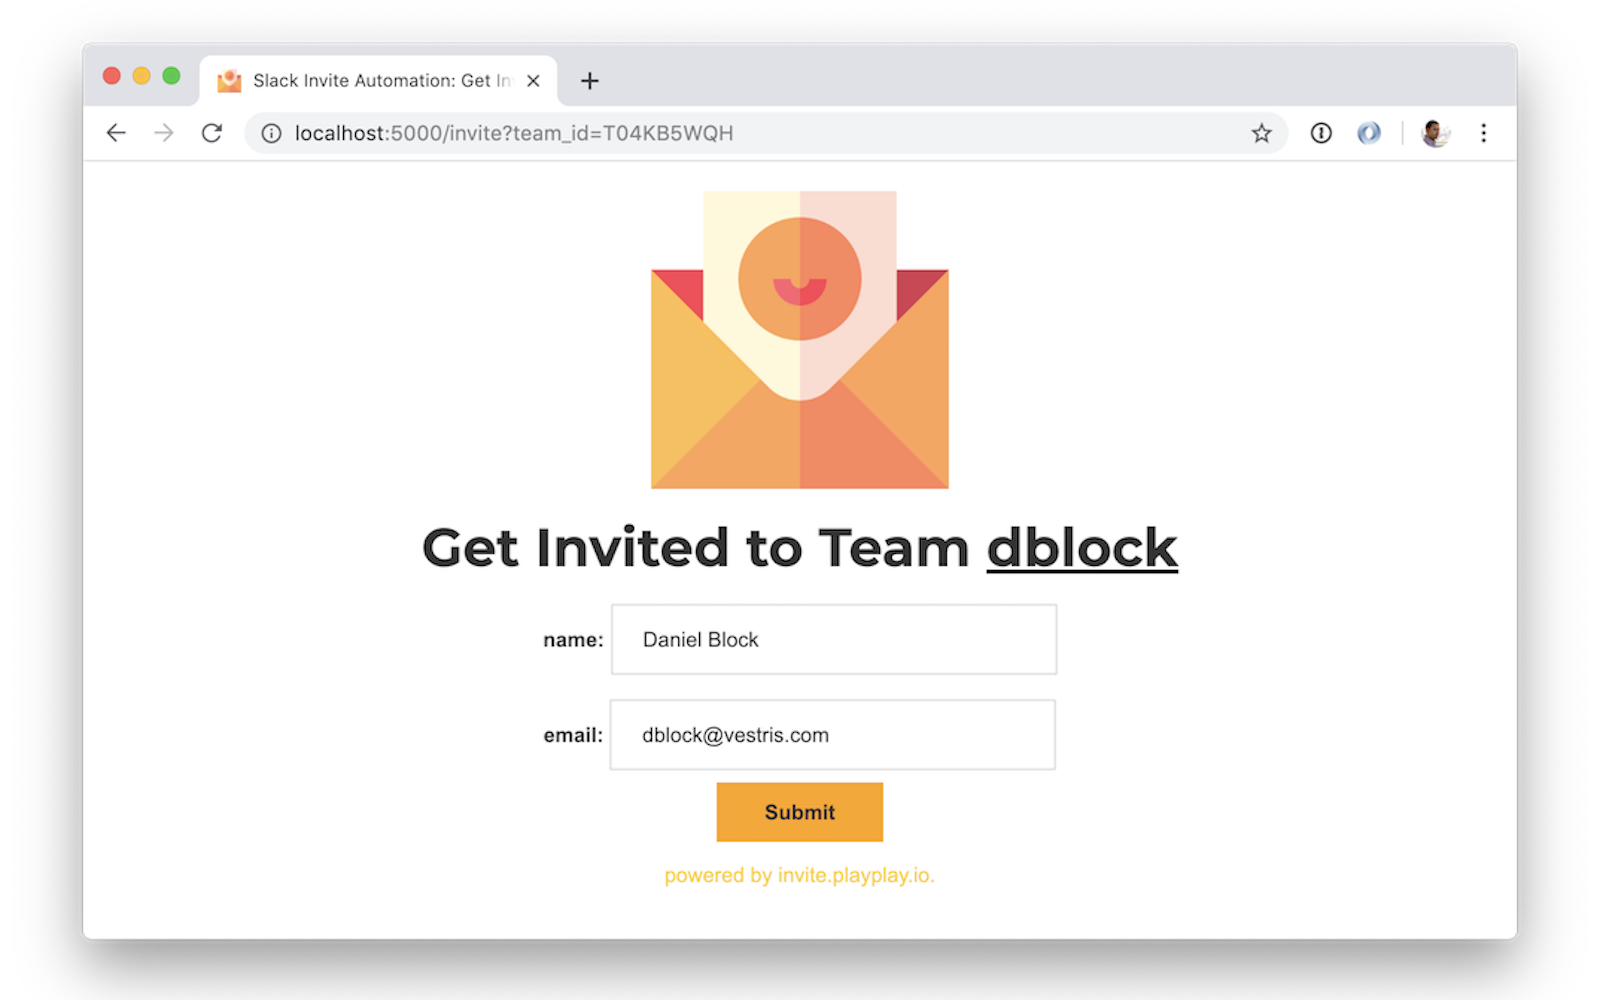 on-developing-and-marketing-slack-bots-while-working-at-amazon